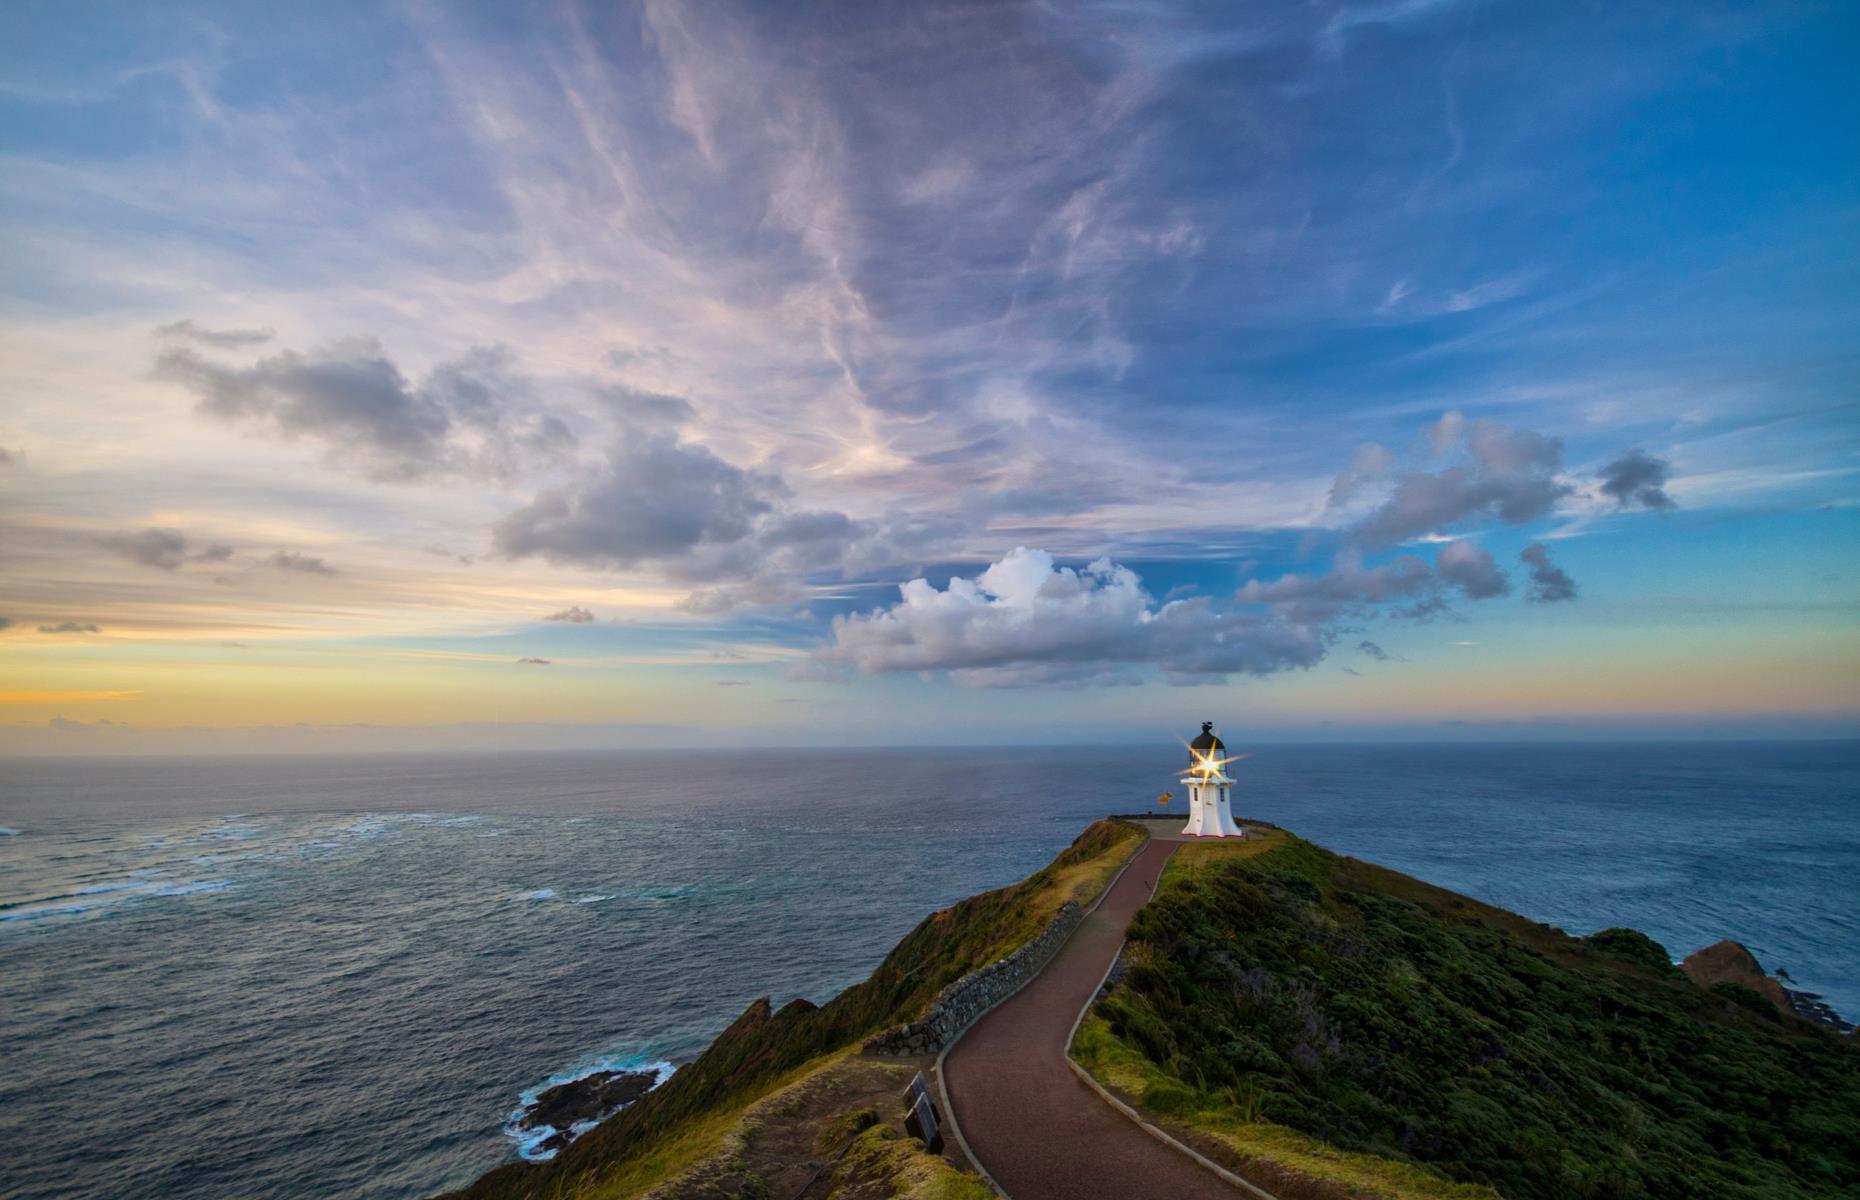 <p>Standing at the lighthouse at the far north of New Zealand looking out at the Tasman Sea and the Pacific Ocean colliding, you can feel why it’s such a special place for Māori. <a href="https://www.newzealand.com/uk/cape-reinga/">This sacred site</a> at the end of the road marks the point from which Māori wairua (spirit) return to their traditional homeland. While it's not the most northern point of the country (North Cape is, but it's not open to public), this is as far as you can get by road. There are guided coach tours departing from Kaitaia and Paihia daily too.</p>